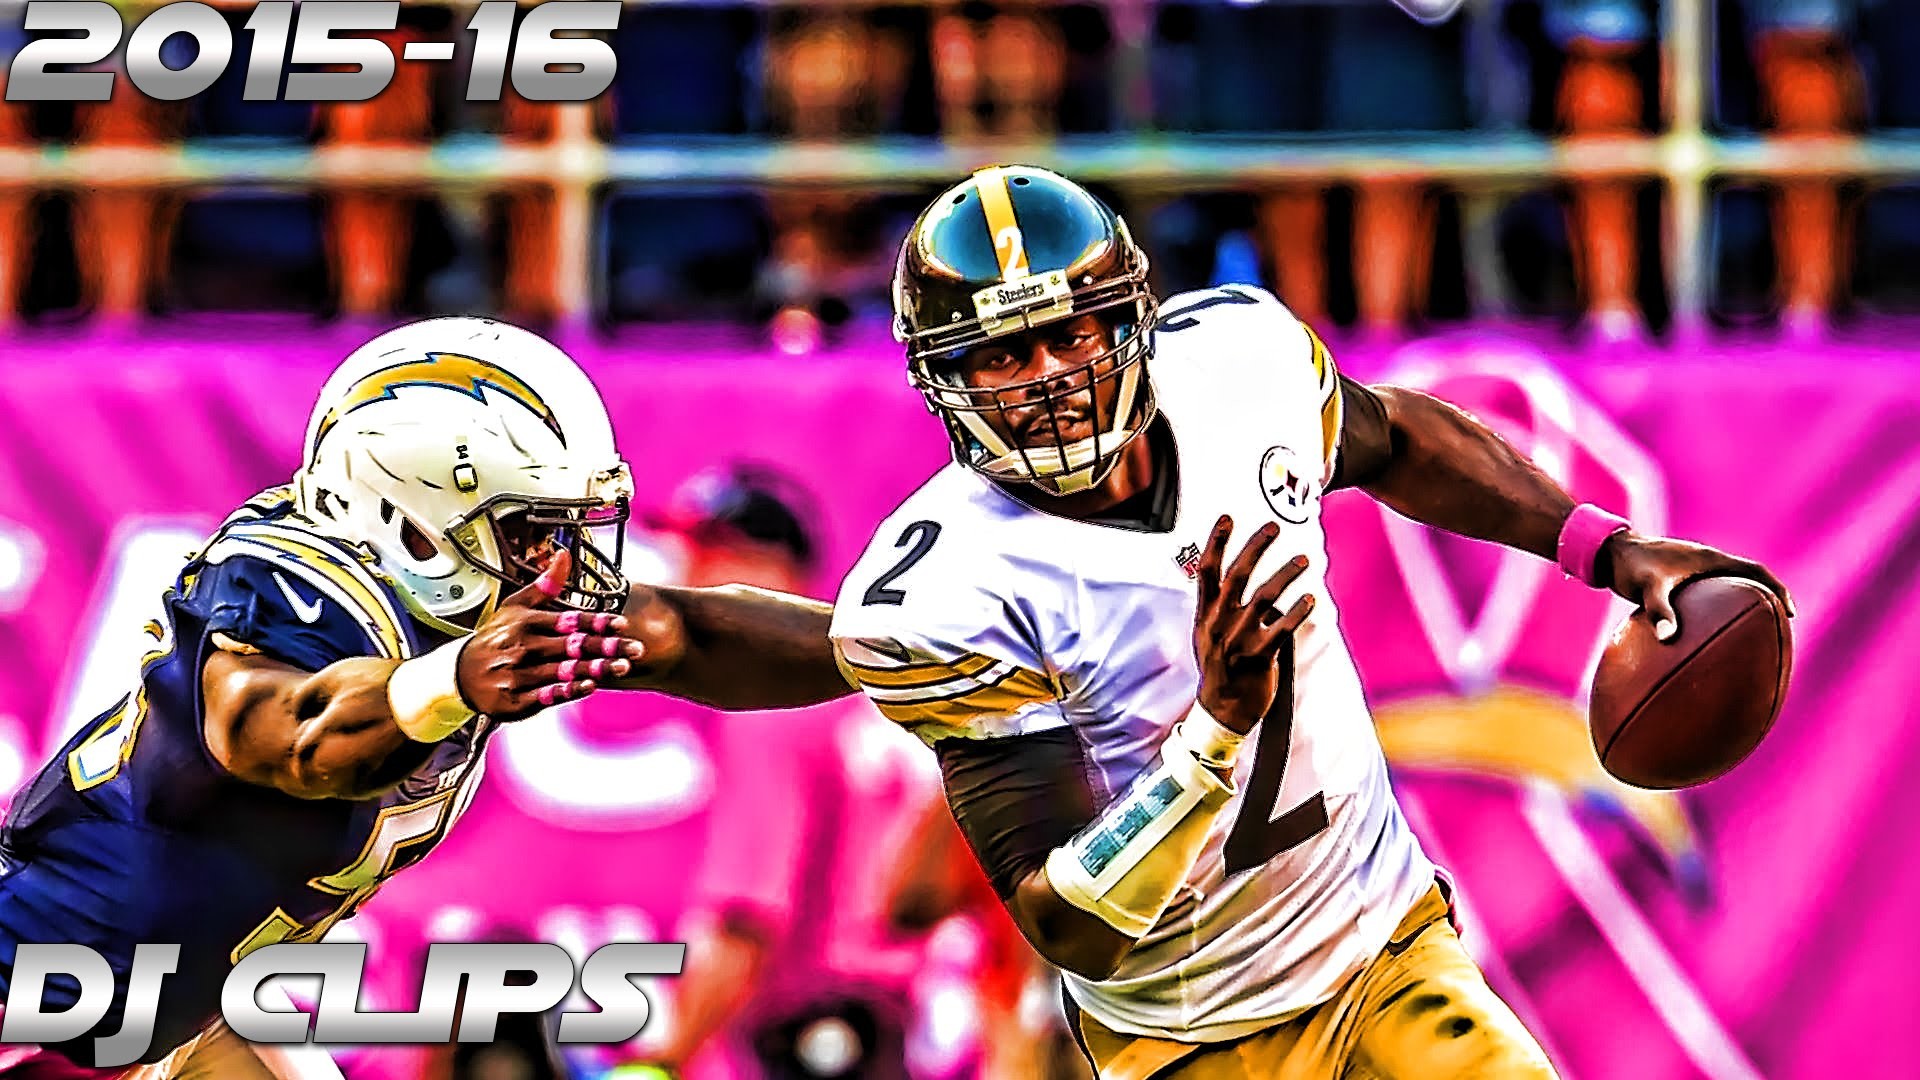 1920x1080 Michael Vick Full Highlights (2015.10.12) at Chargers - 212 Yards 1 TD,  VINTAGE VICK! - YouTube